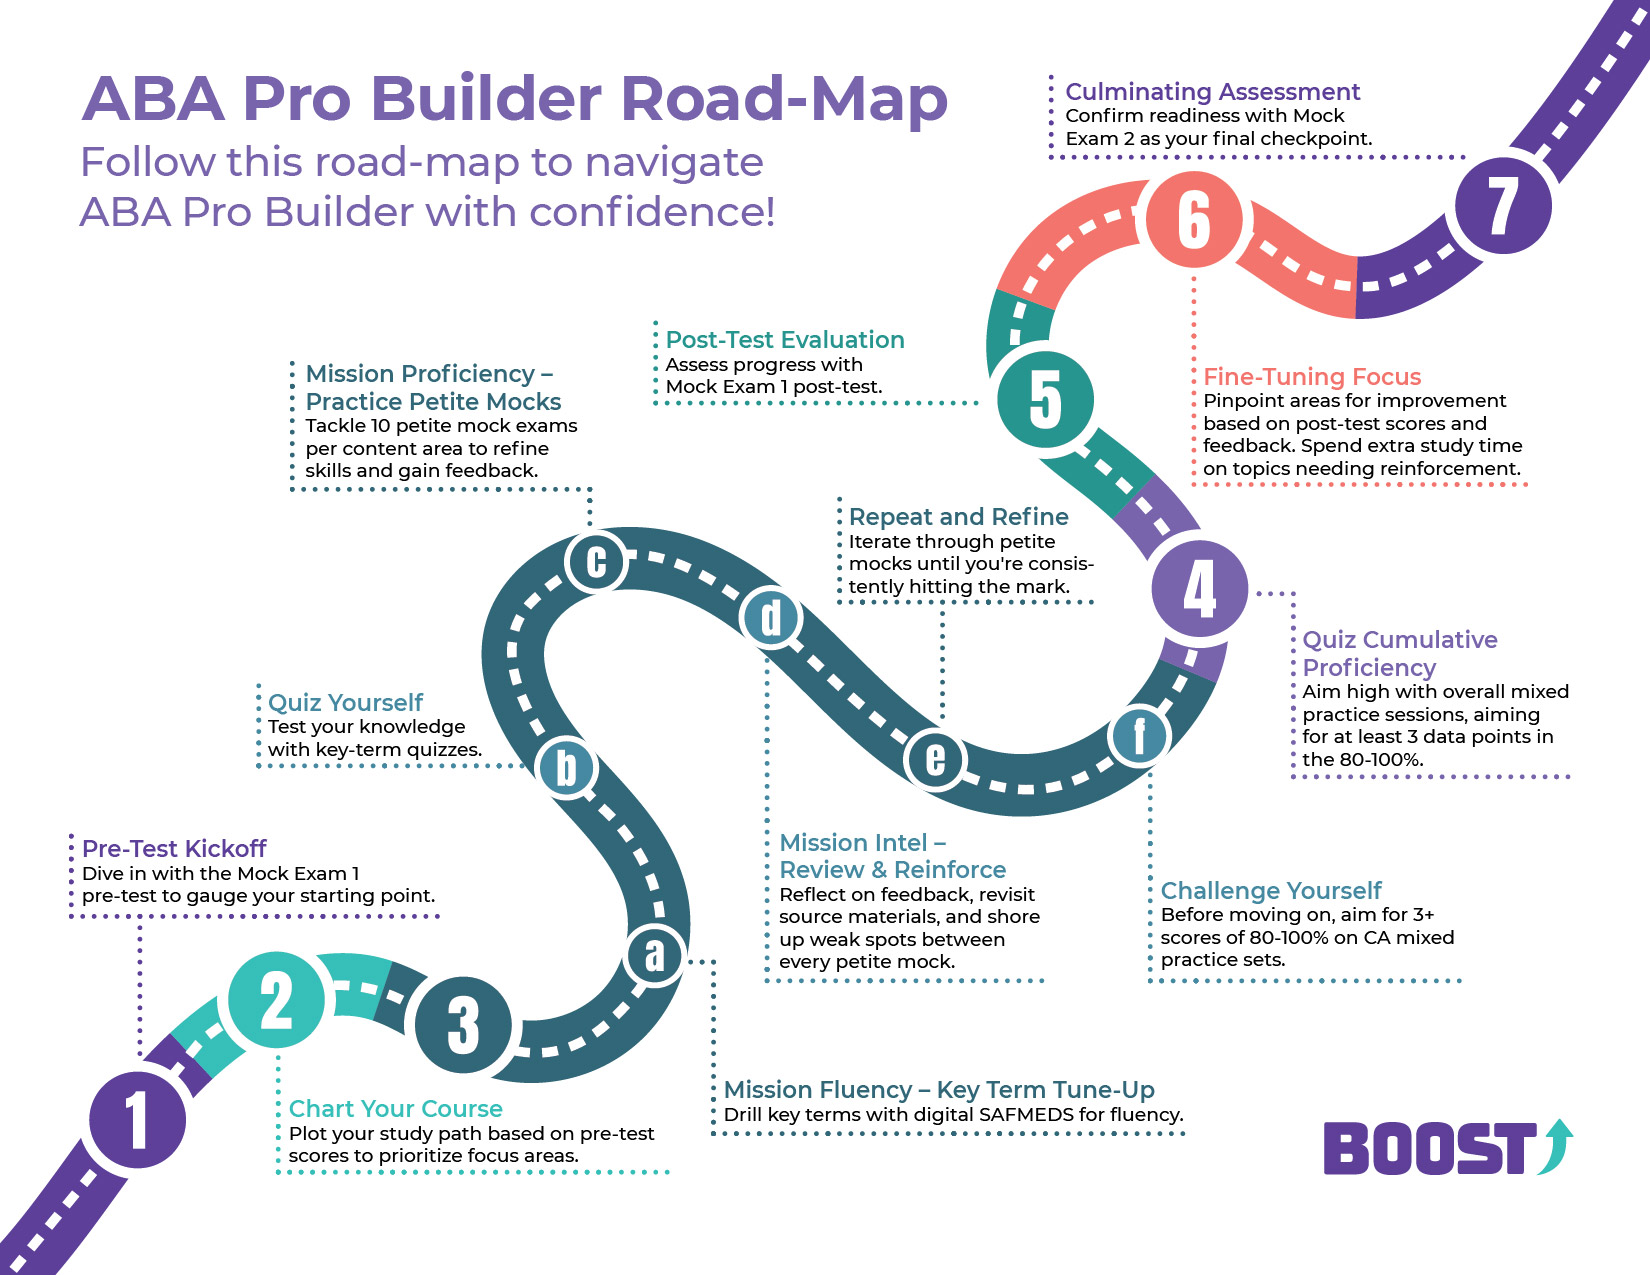 ABA Pro Builder Road-Map